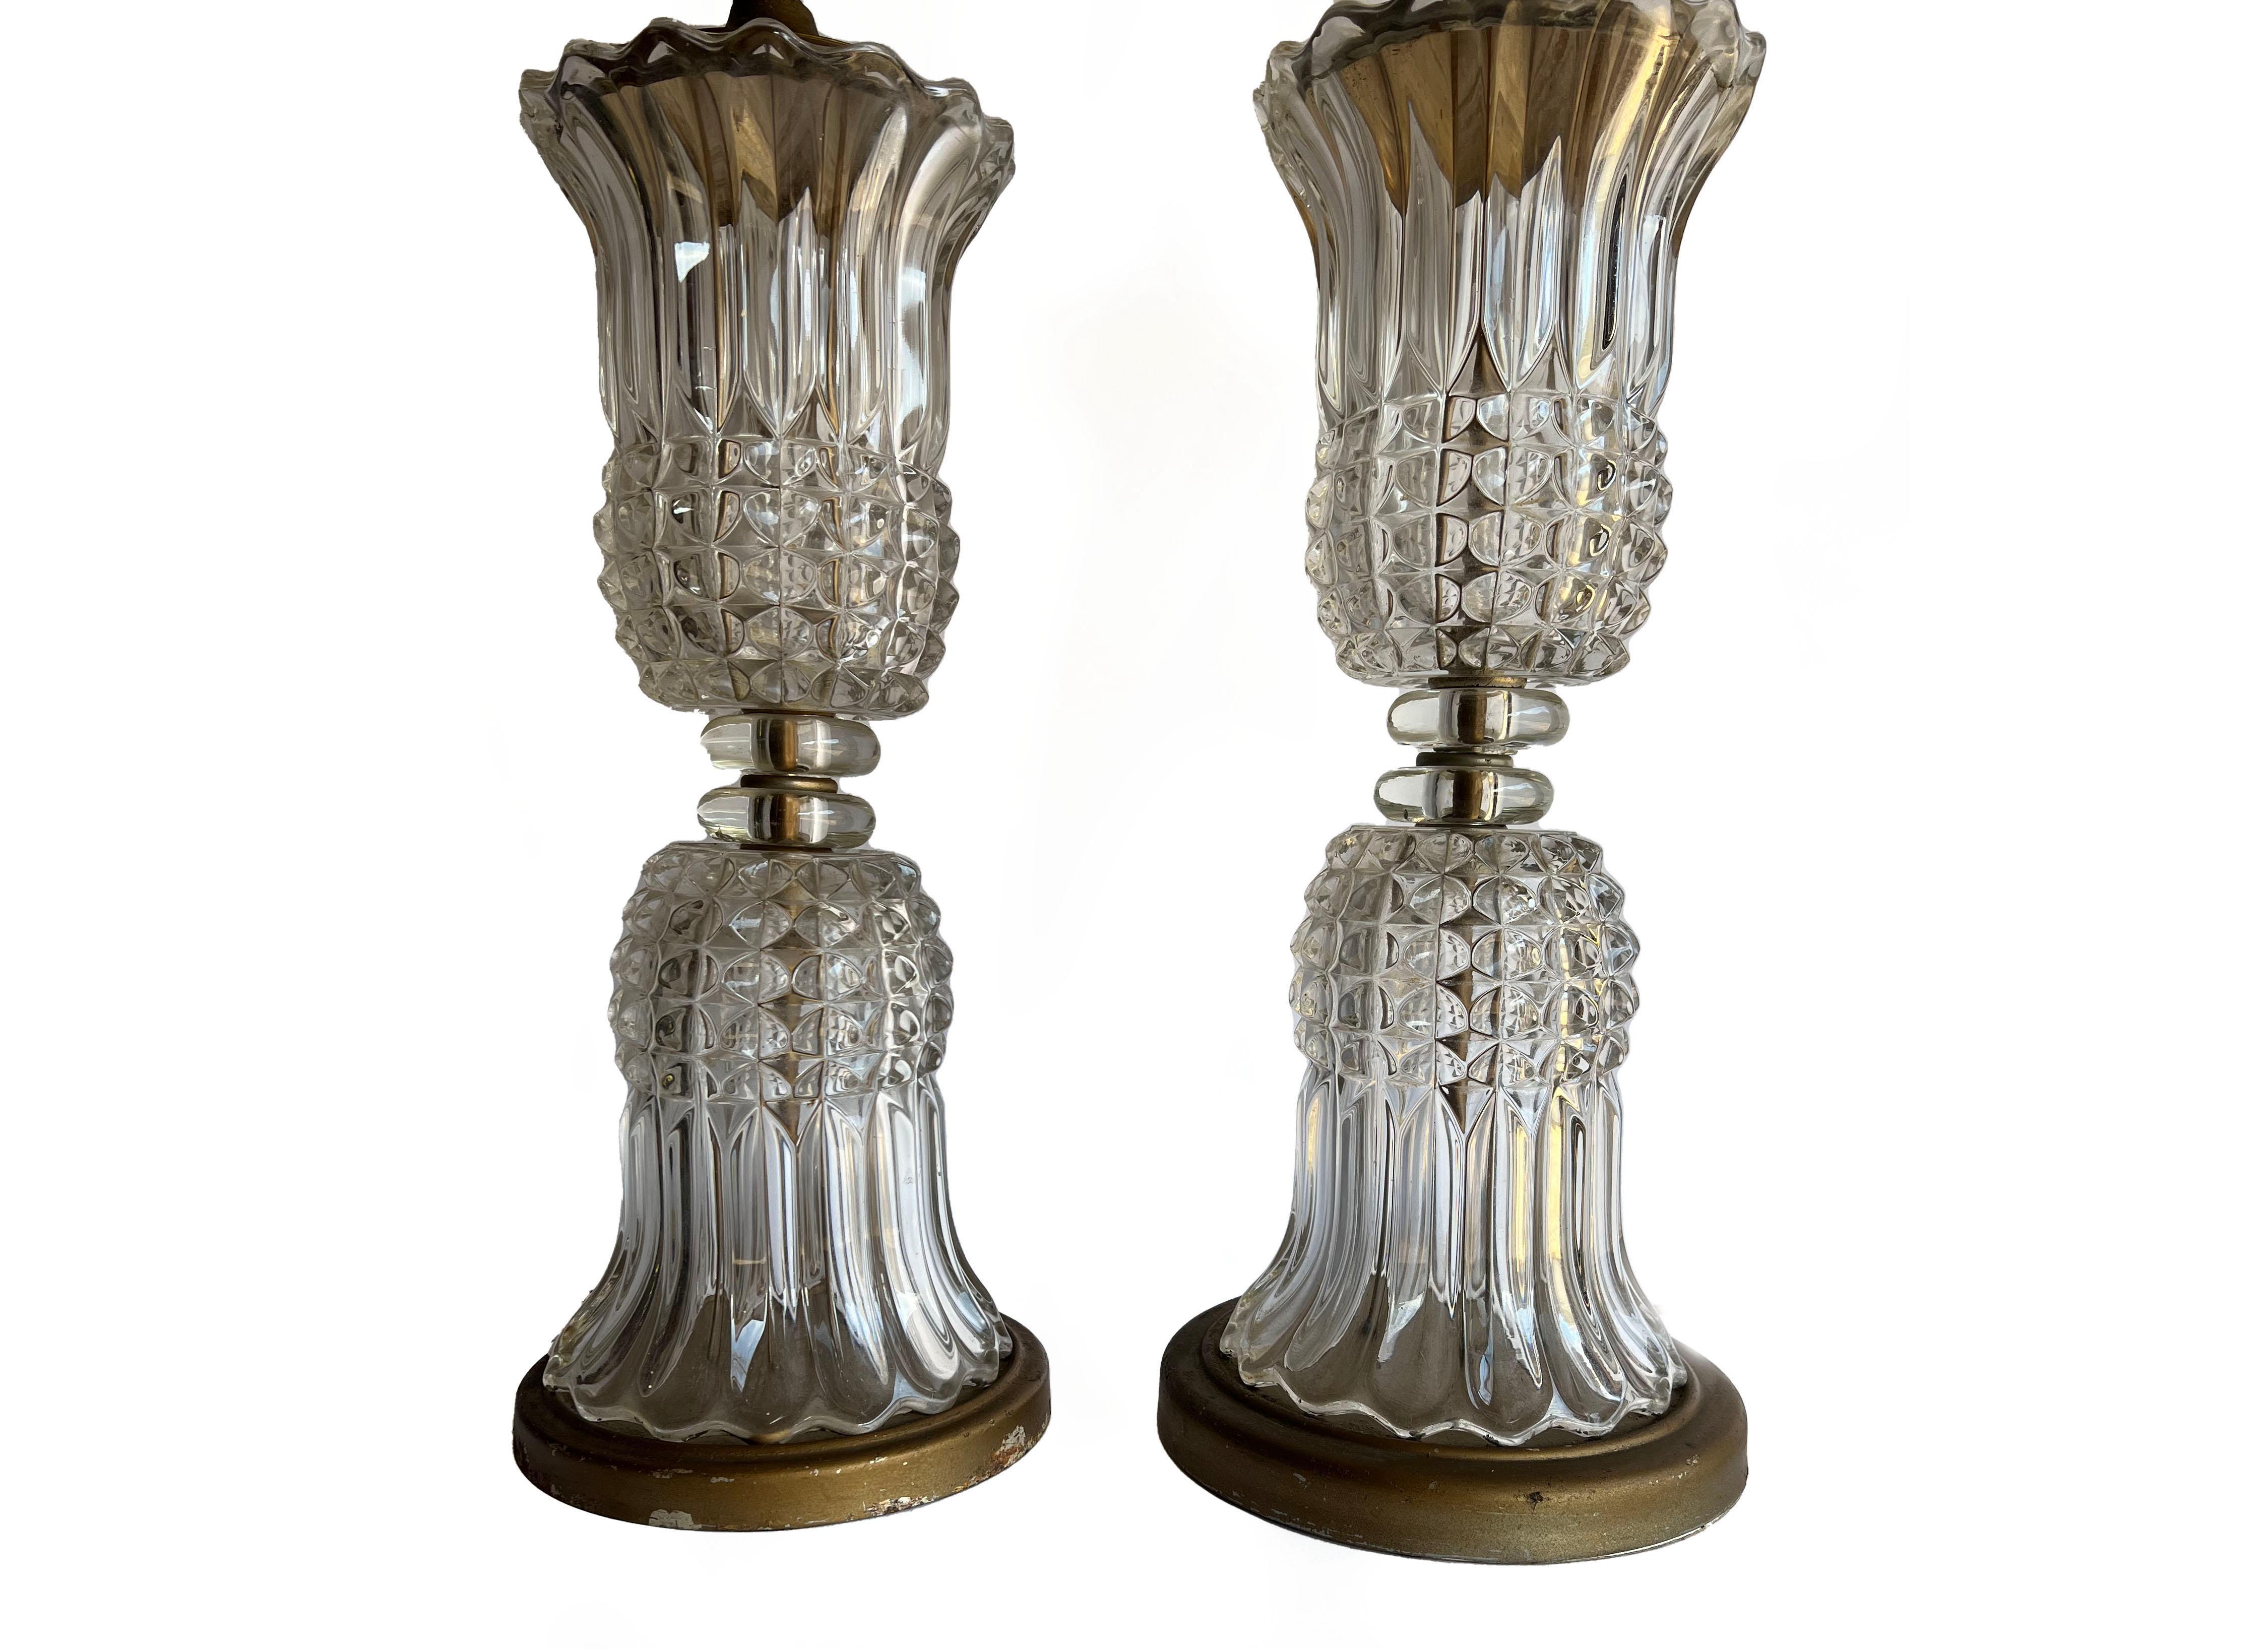 Pair of antique French Empire or Hollywood Regency style molded crystal glass lamps. Featuring a transparent, reflective, molded crystal vase form inverted on itself. Glass features diamond cut and fluting. Beautiful, sparkling addition to any